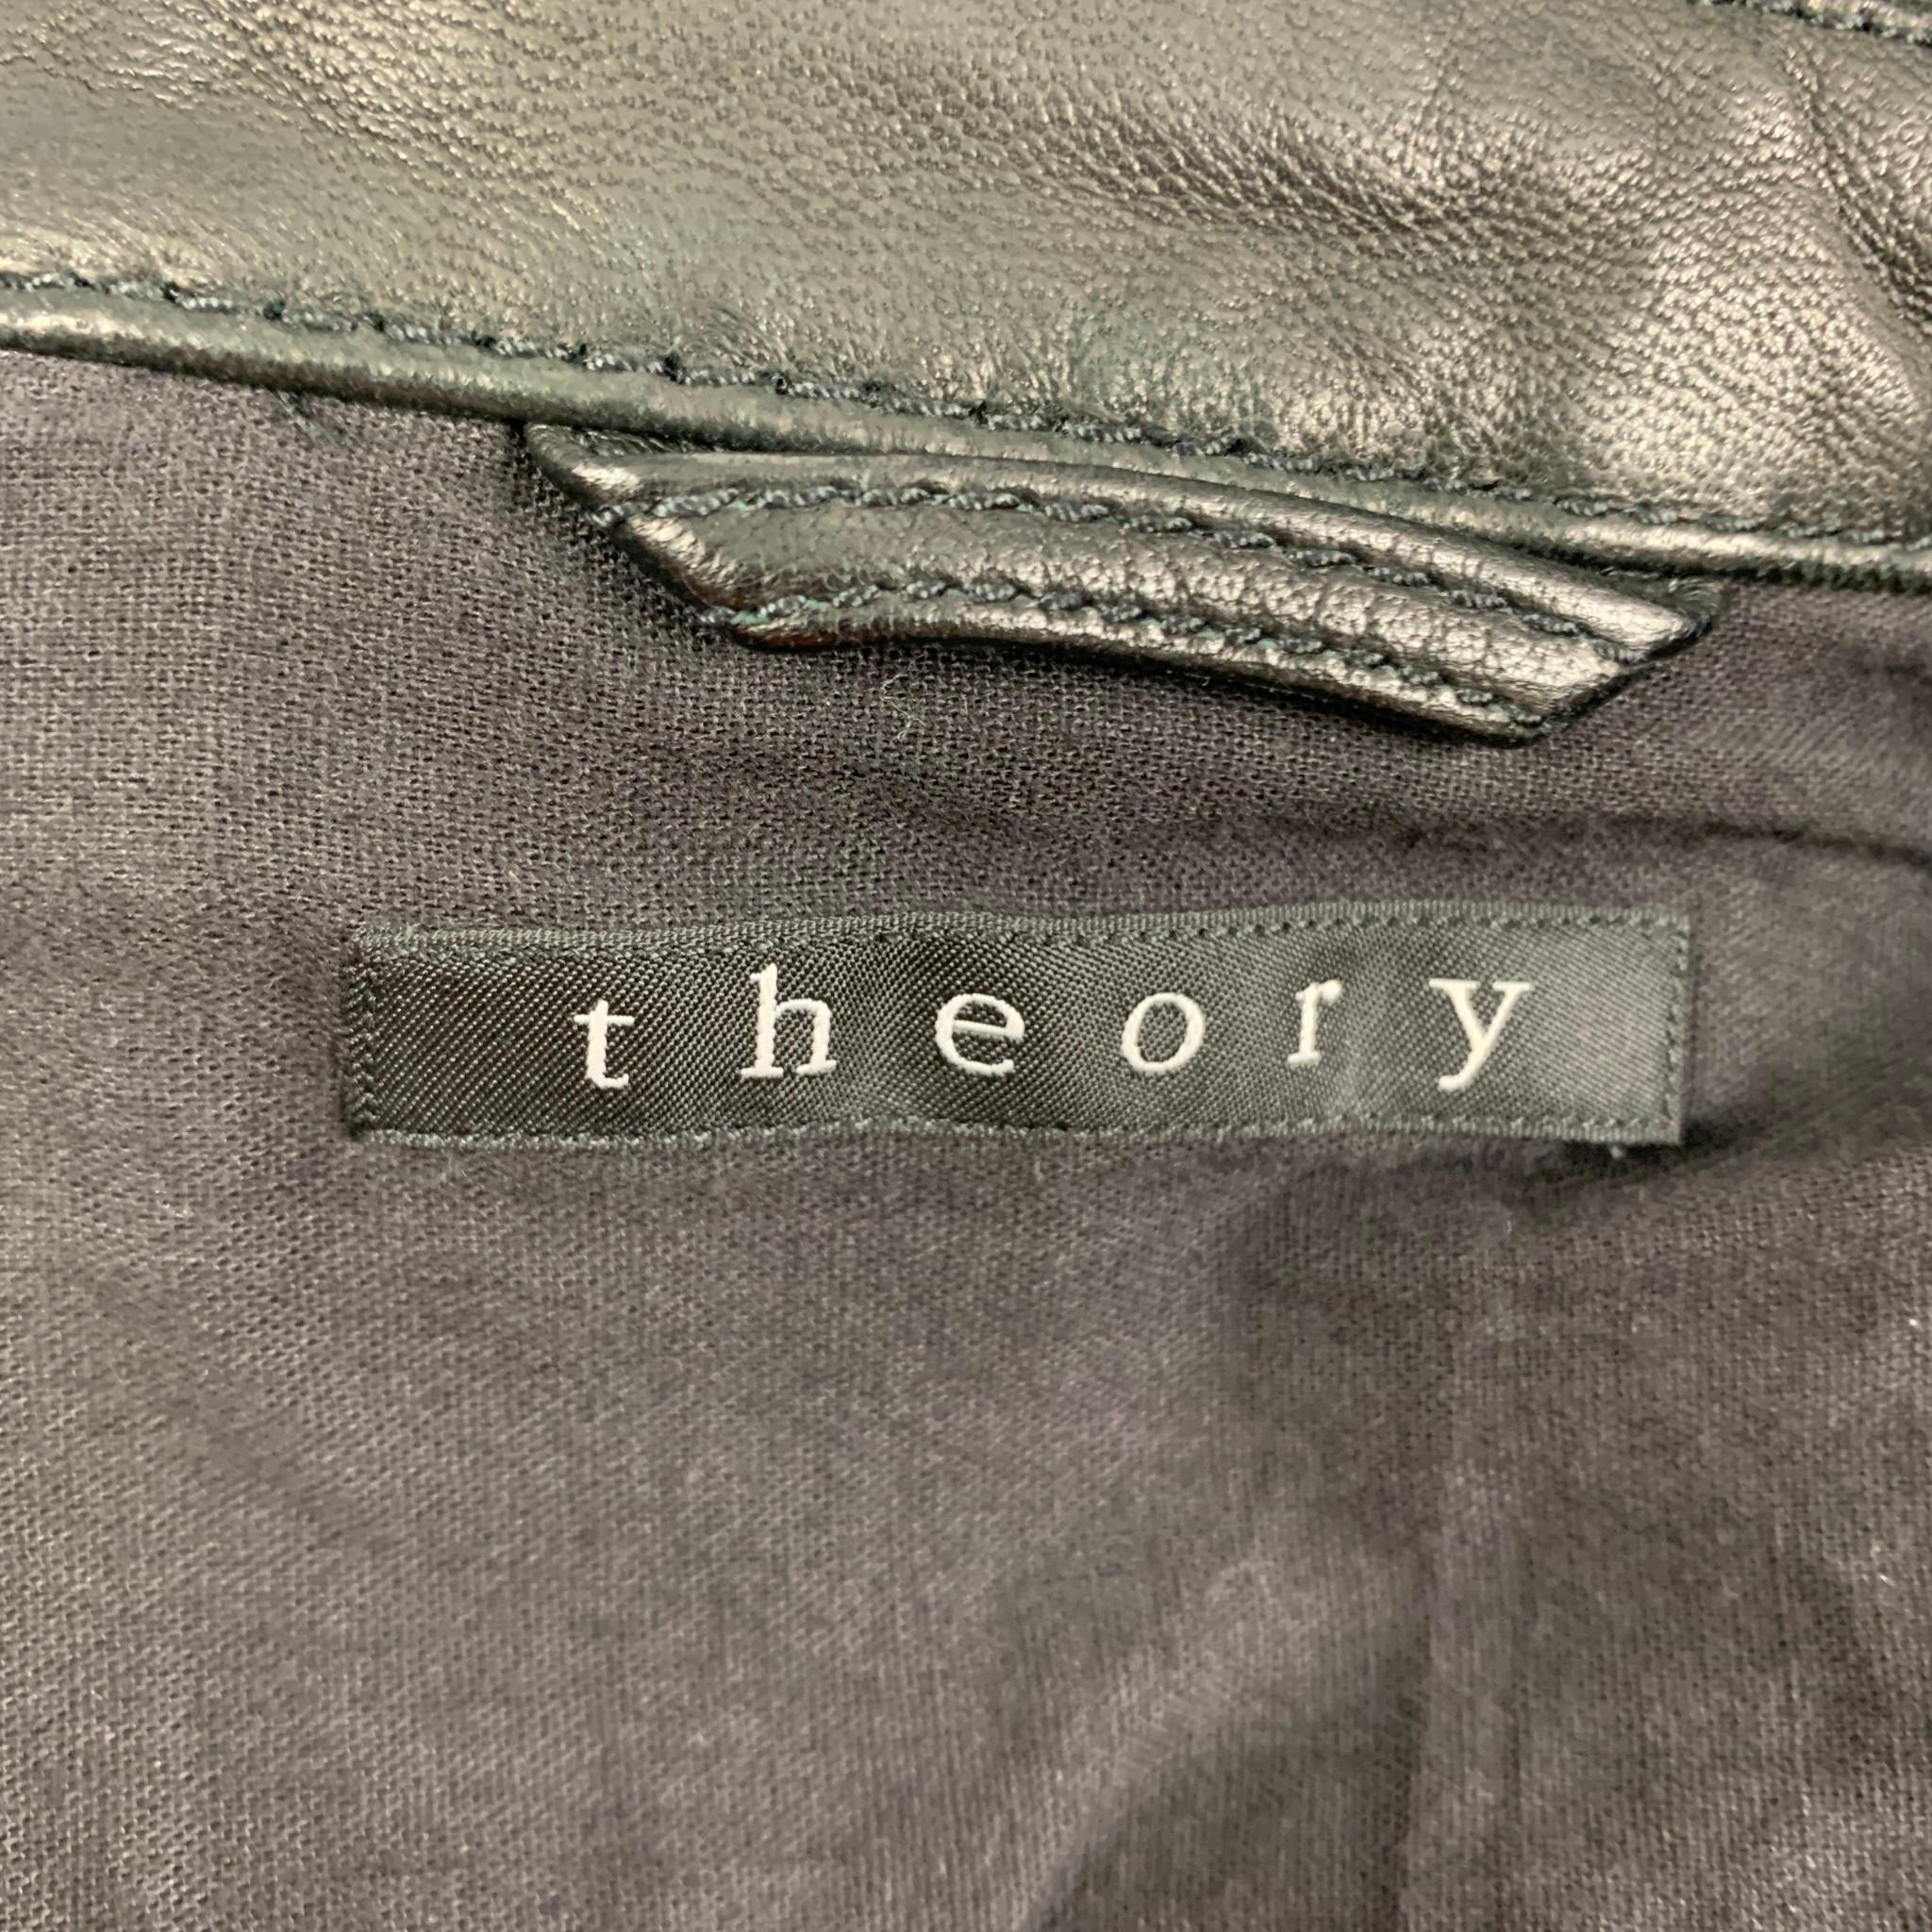 THEORY jacket comes in a black leather featuring a trucker style, top stitching, spread collar, and a buttoned closure. 

Very Good Pre-Owned Condition.
Marked: S

Measurements:

Shoulder: 16.5 in.
Chest: 36 in.
Sleeve: 26 in.
Length: 23.5 in. 